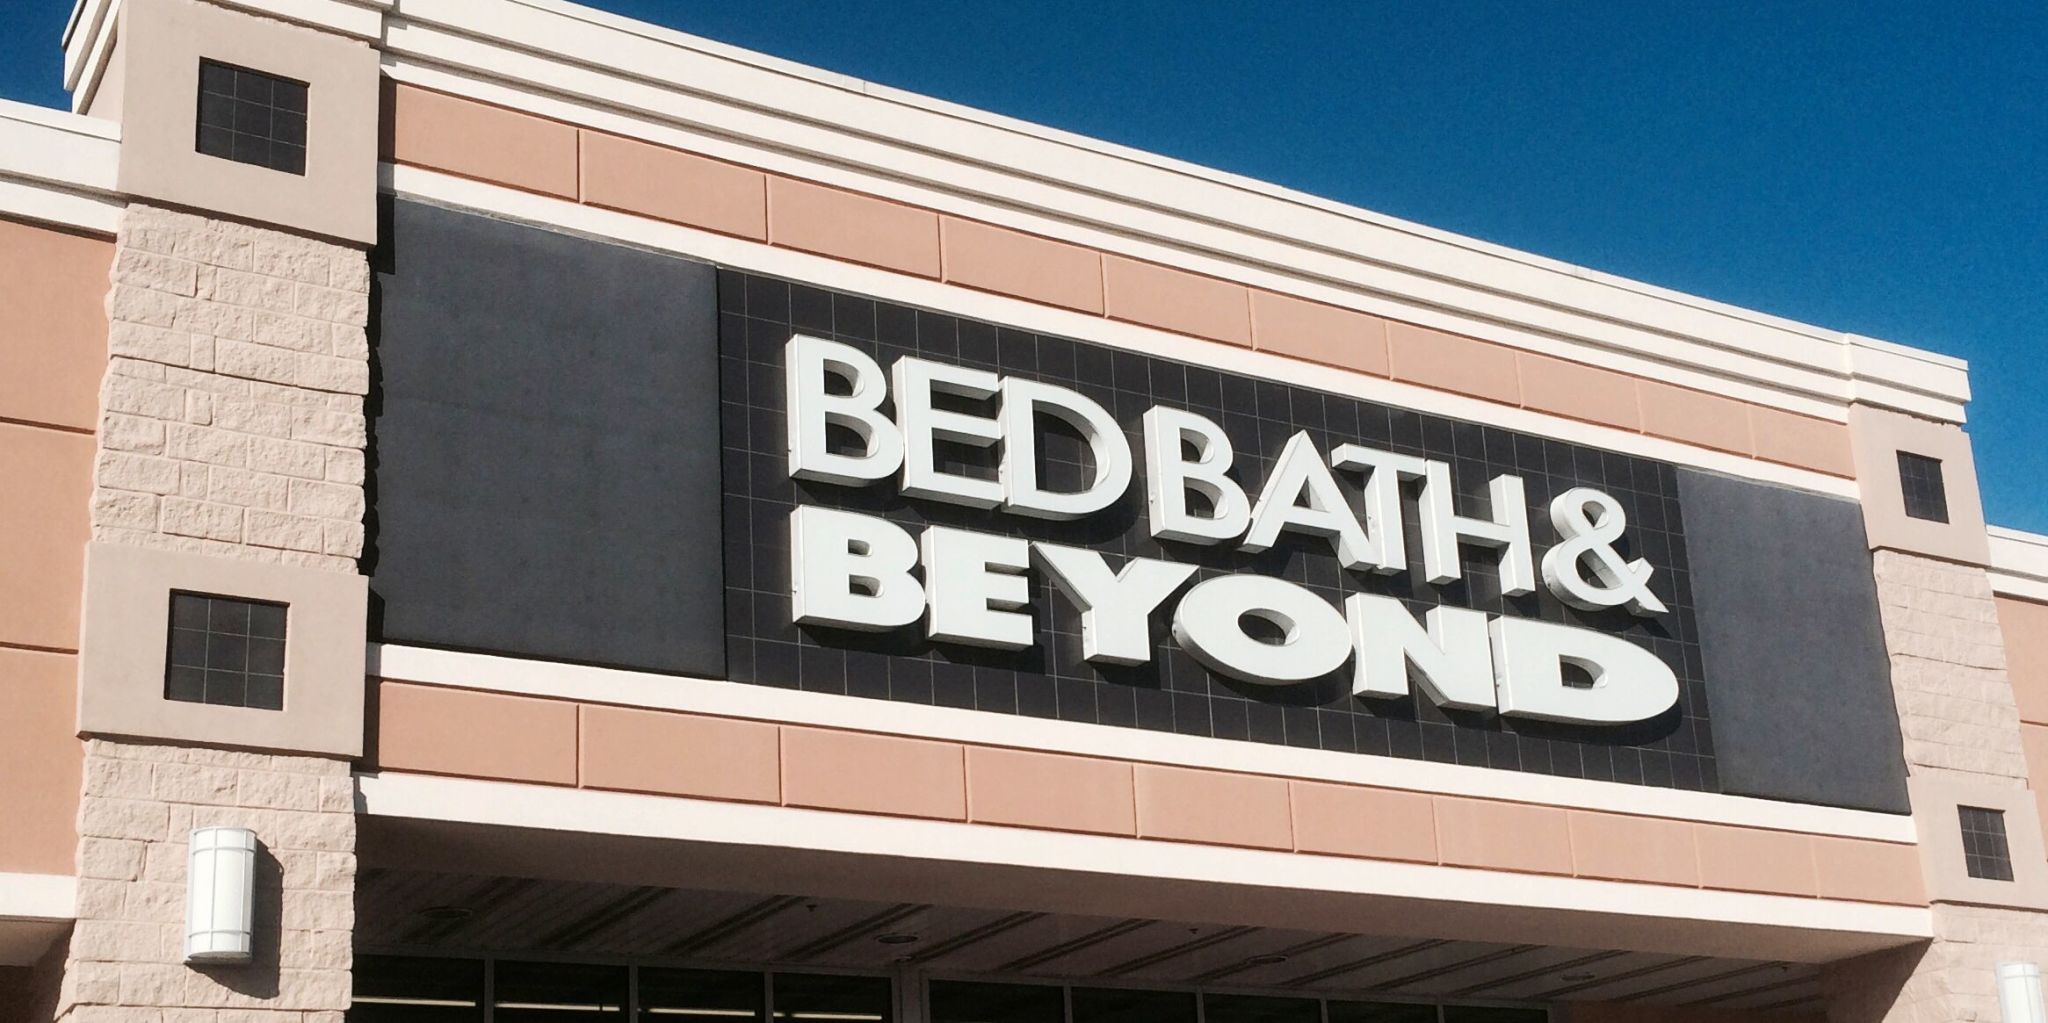 bed bath and beyond return policy